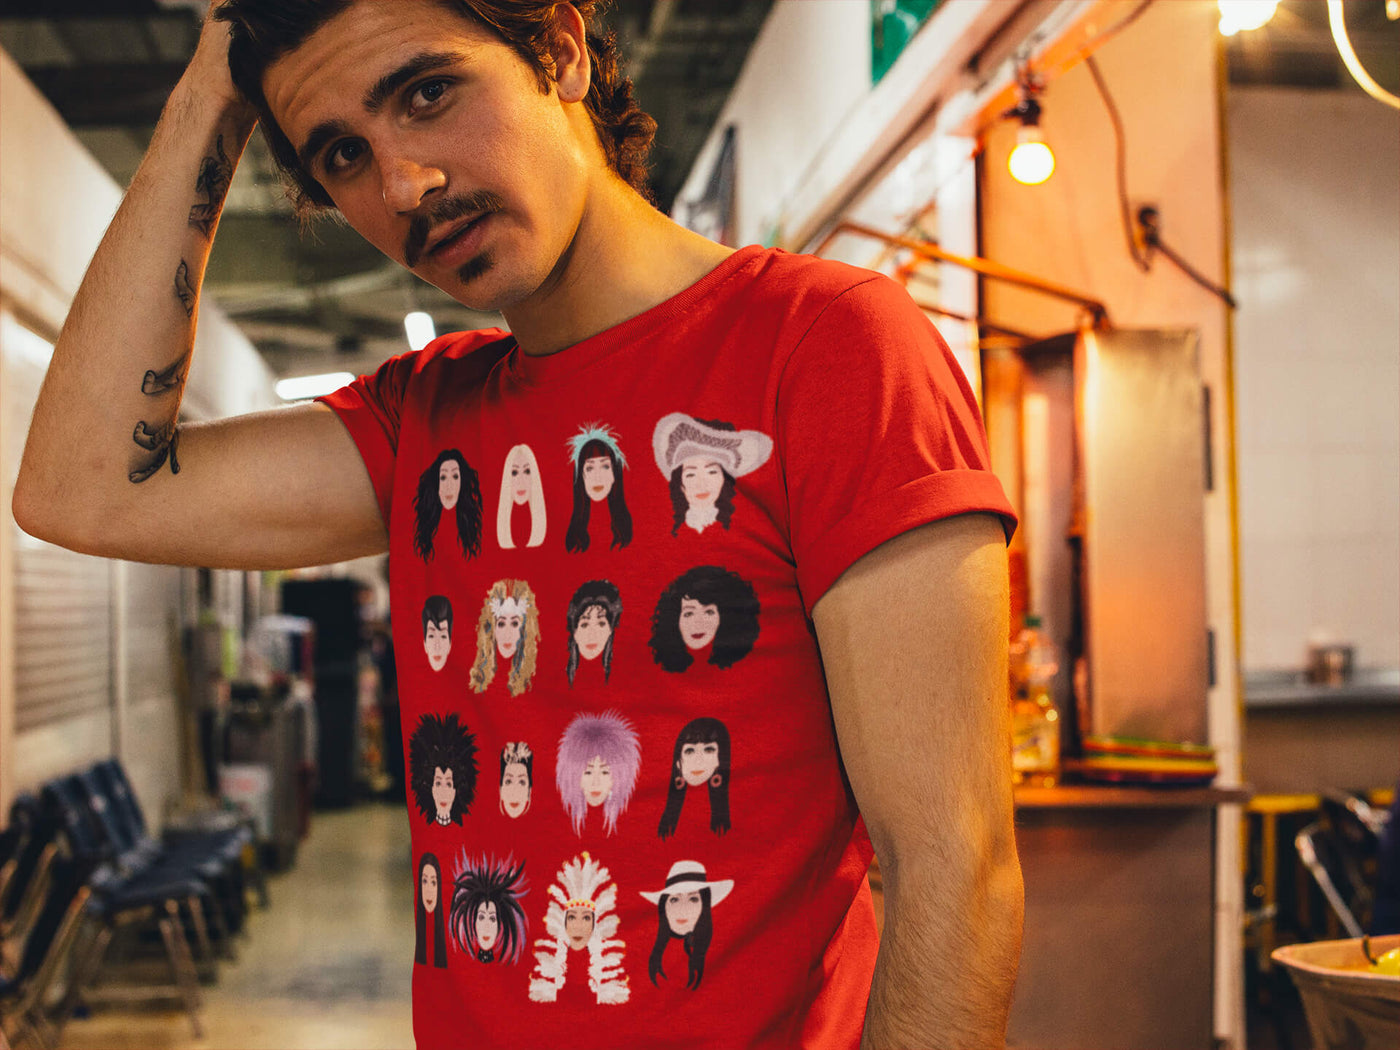 Guy with moustache grabbing his hair while wearing Gllamazon's Turn Back Time Cher T-Shirt inside an urban market